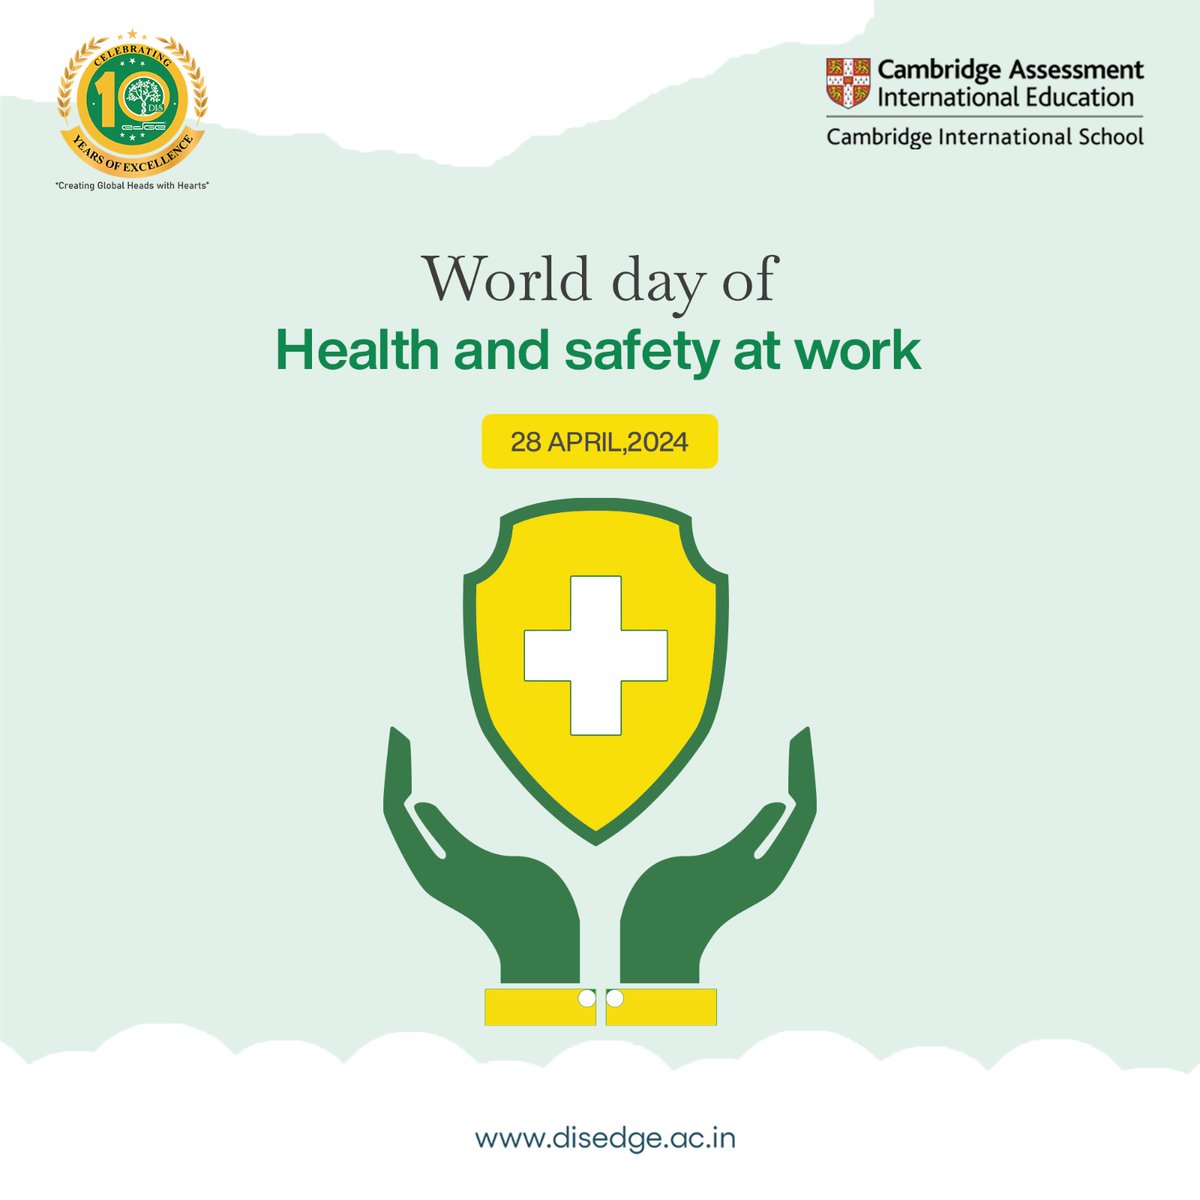 Safety first, always!  

On World Day for Safety and Health at Work, we recommend creating a safe and healthy work environment for everyone.

#DISEdge #WorldWHSDay2024 #SafeDay2024 #IWMD2024 #healthandsafety #safety #Health